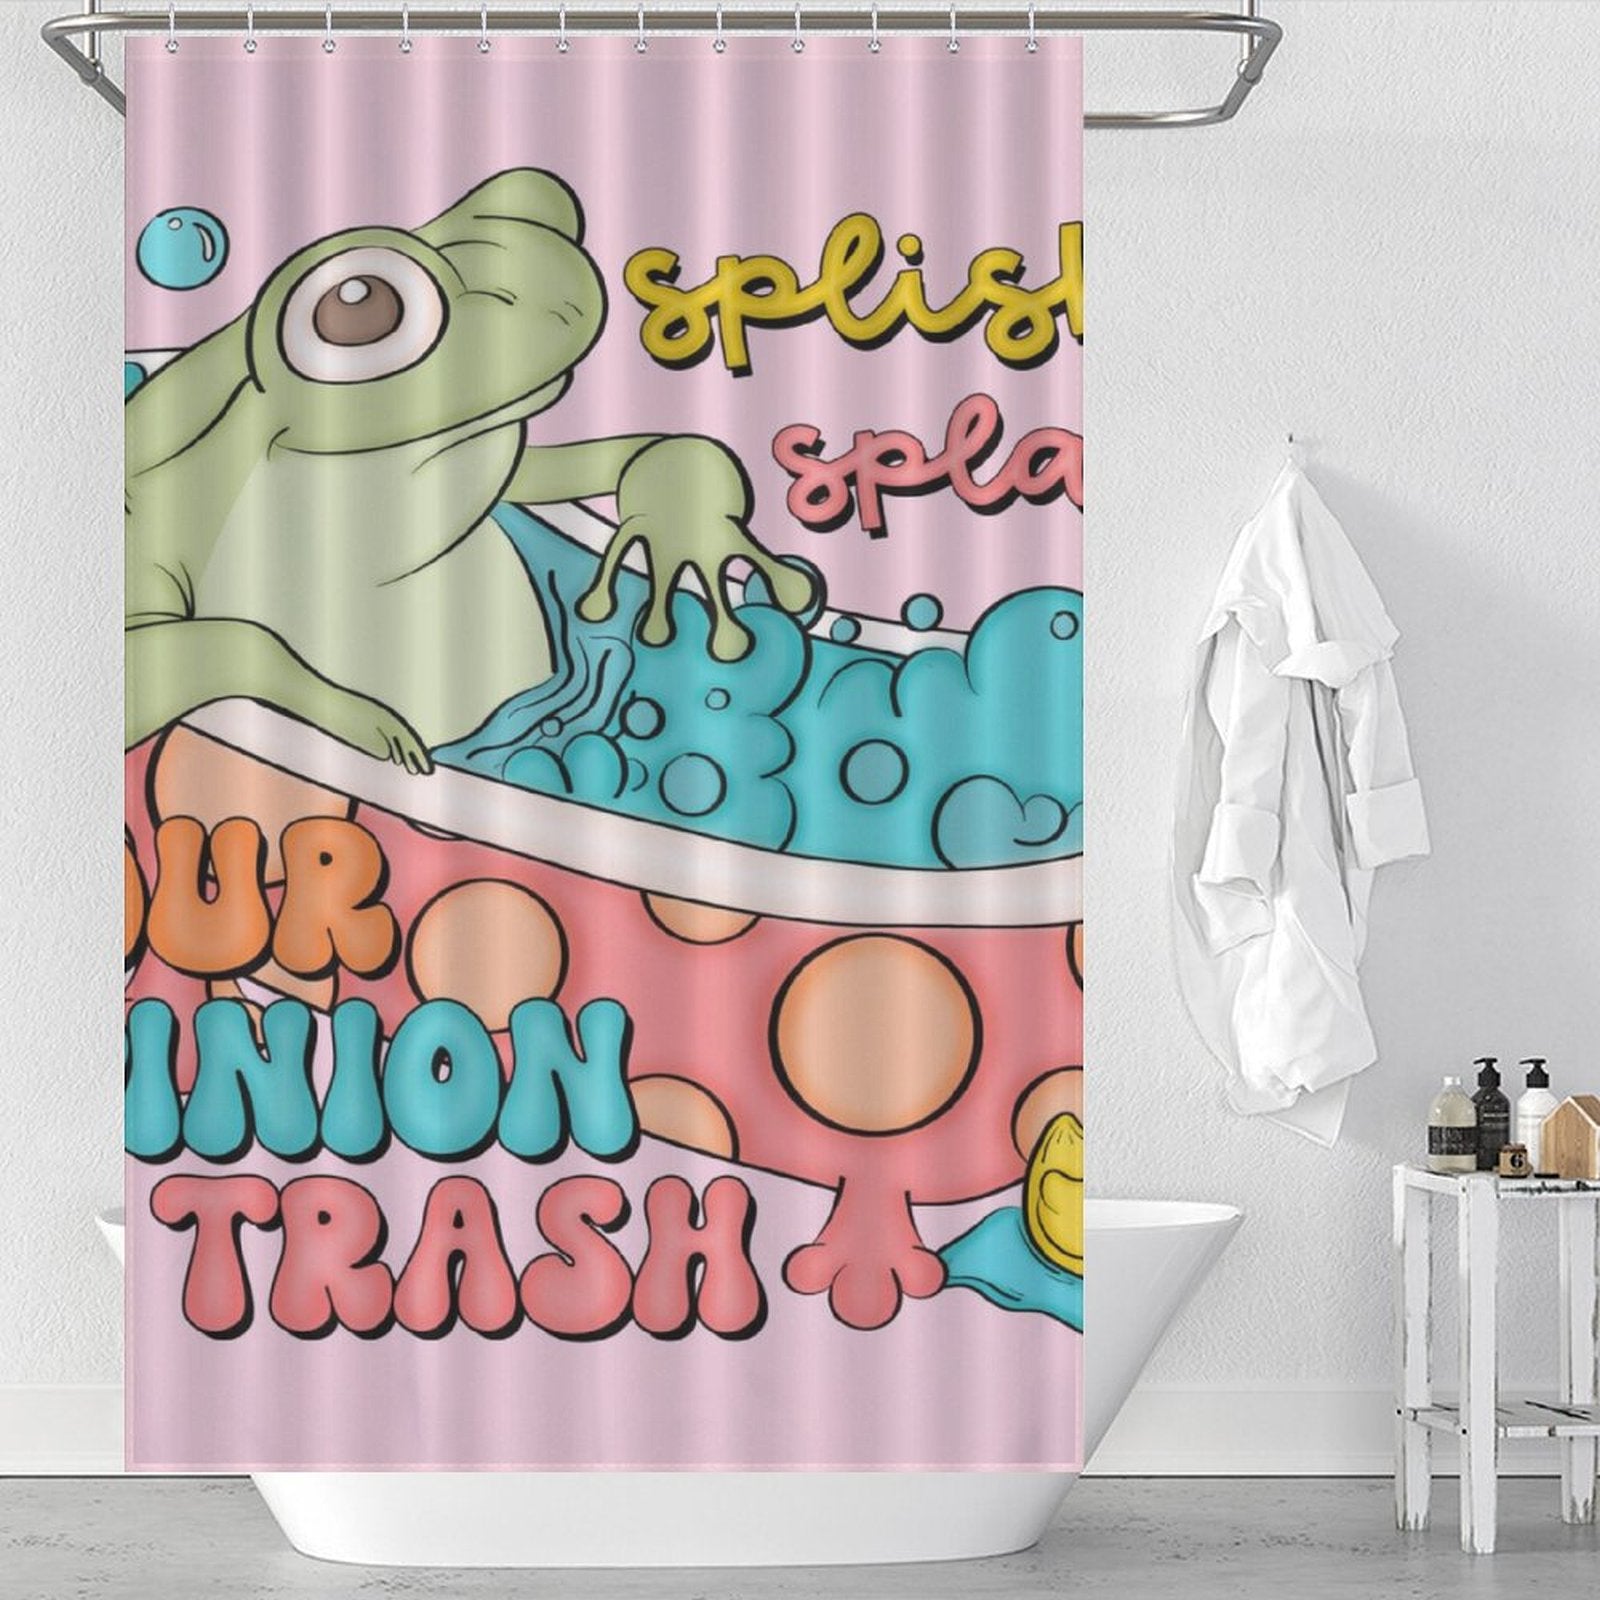 Cotton Cat's Funny Humor Sarcastic Froggy Shower Curtain-Cottoncat featuring a sarcastic froggy in a bathtub with colorful text saying, "Splish Splash, Your Opinion is Trash." A towel hangs on the wall hook beside the tub. Perfect for adding some funny humor to your bathroom decor.